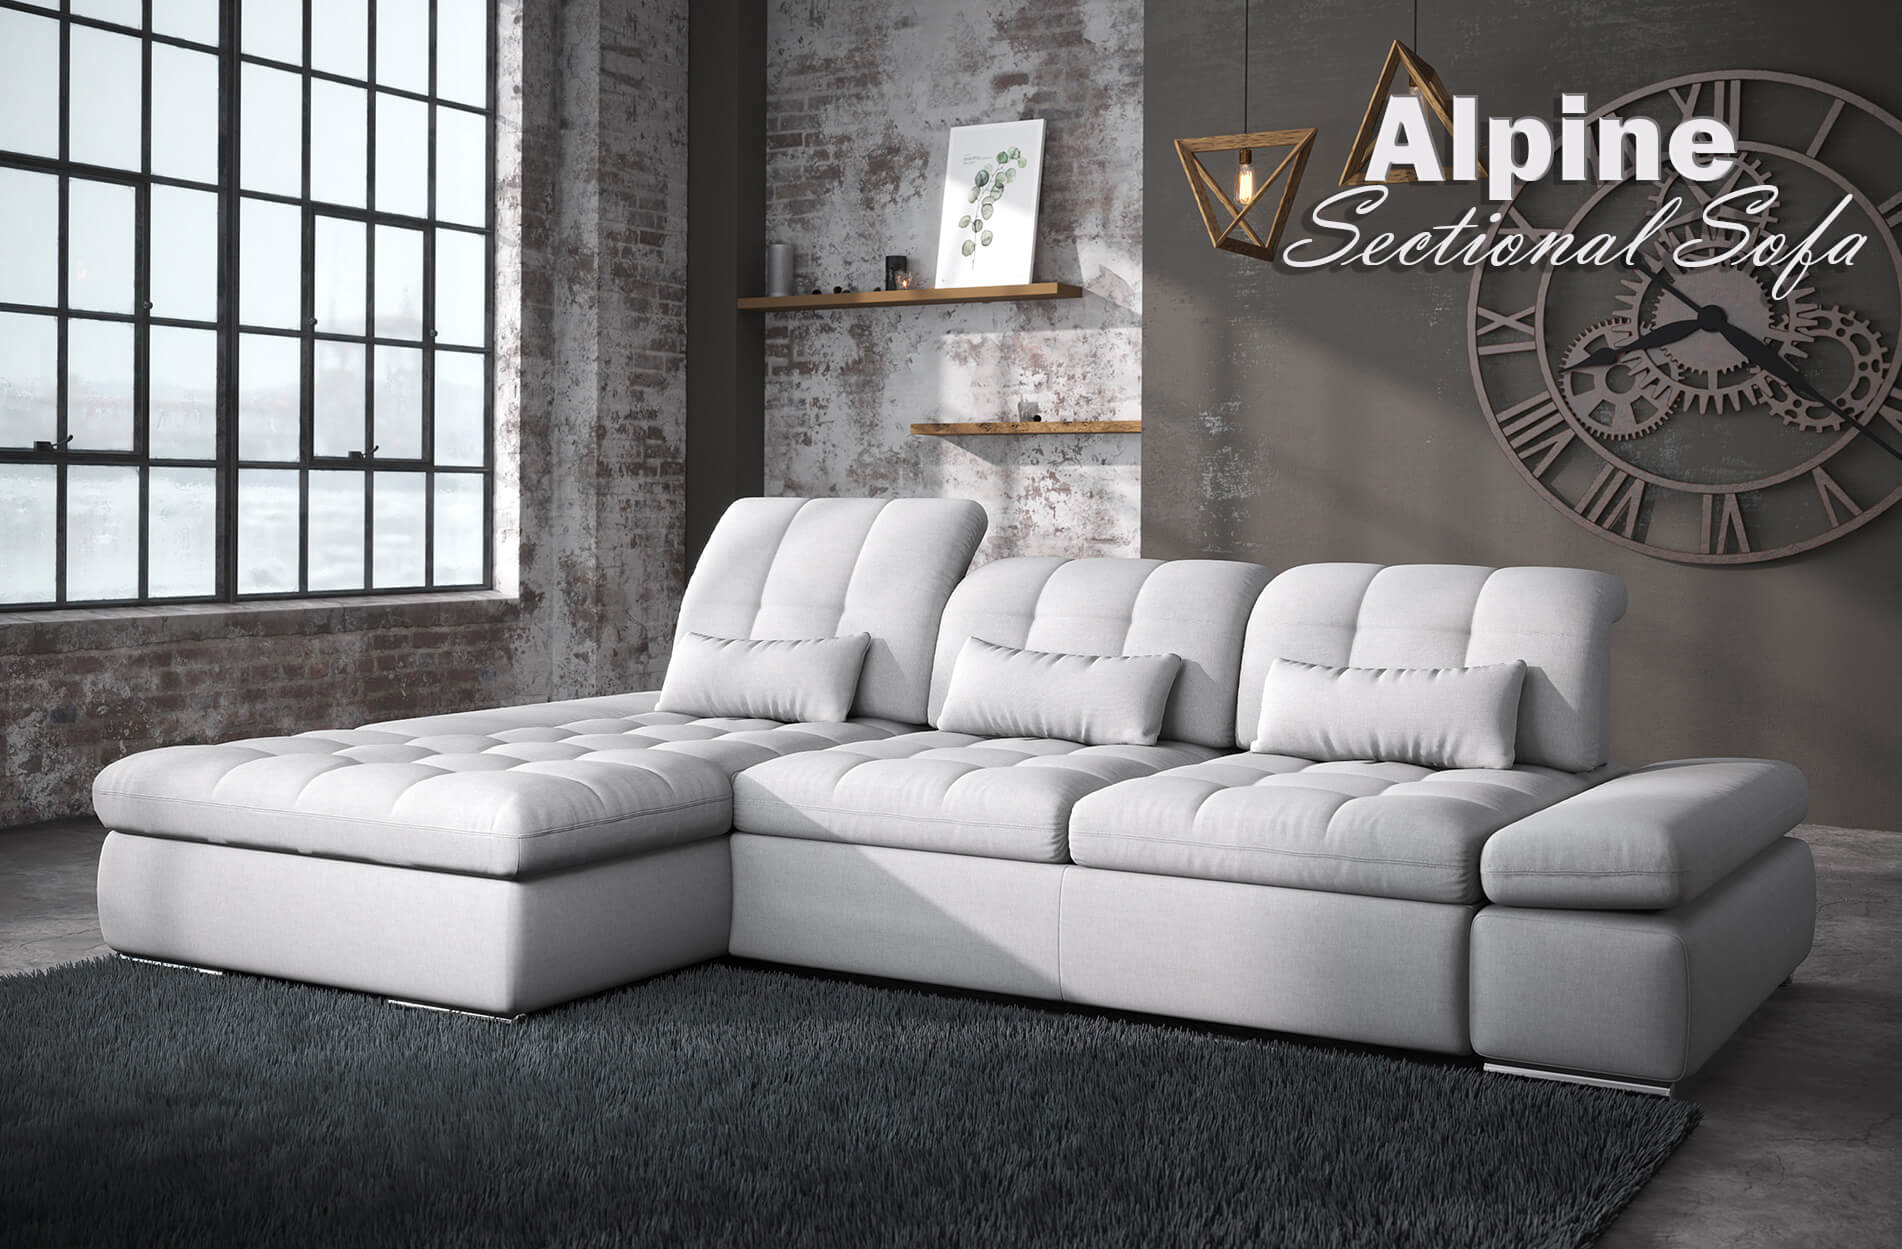 Alpine Sectional Sofa Bed and Storage, Cheap